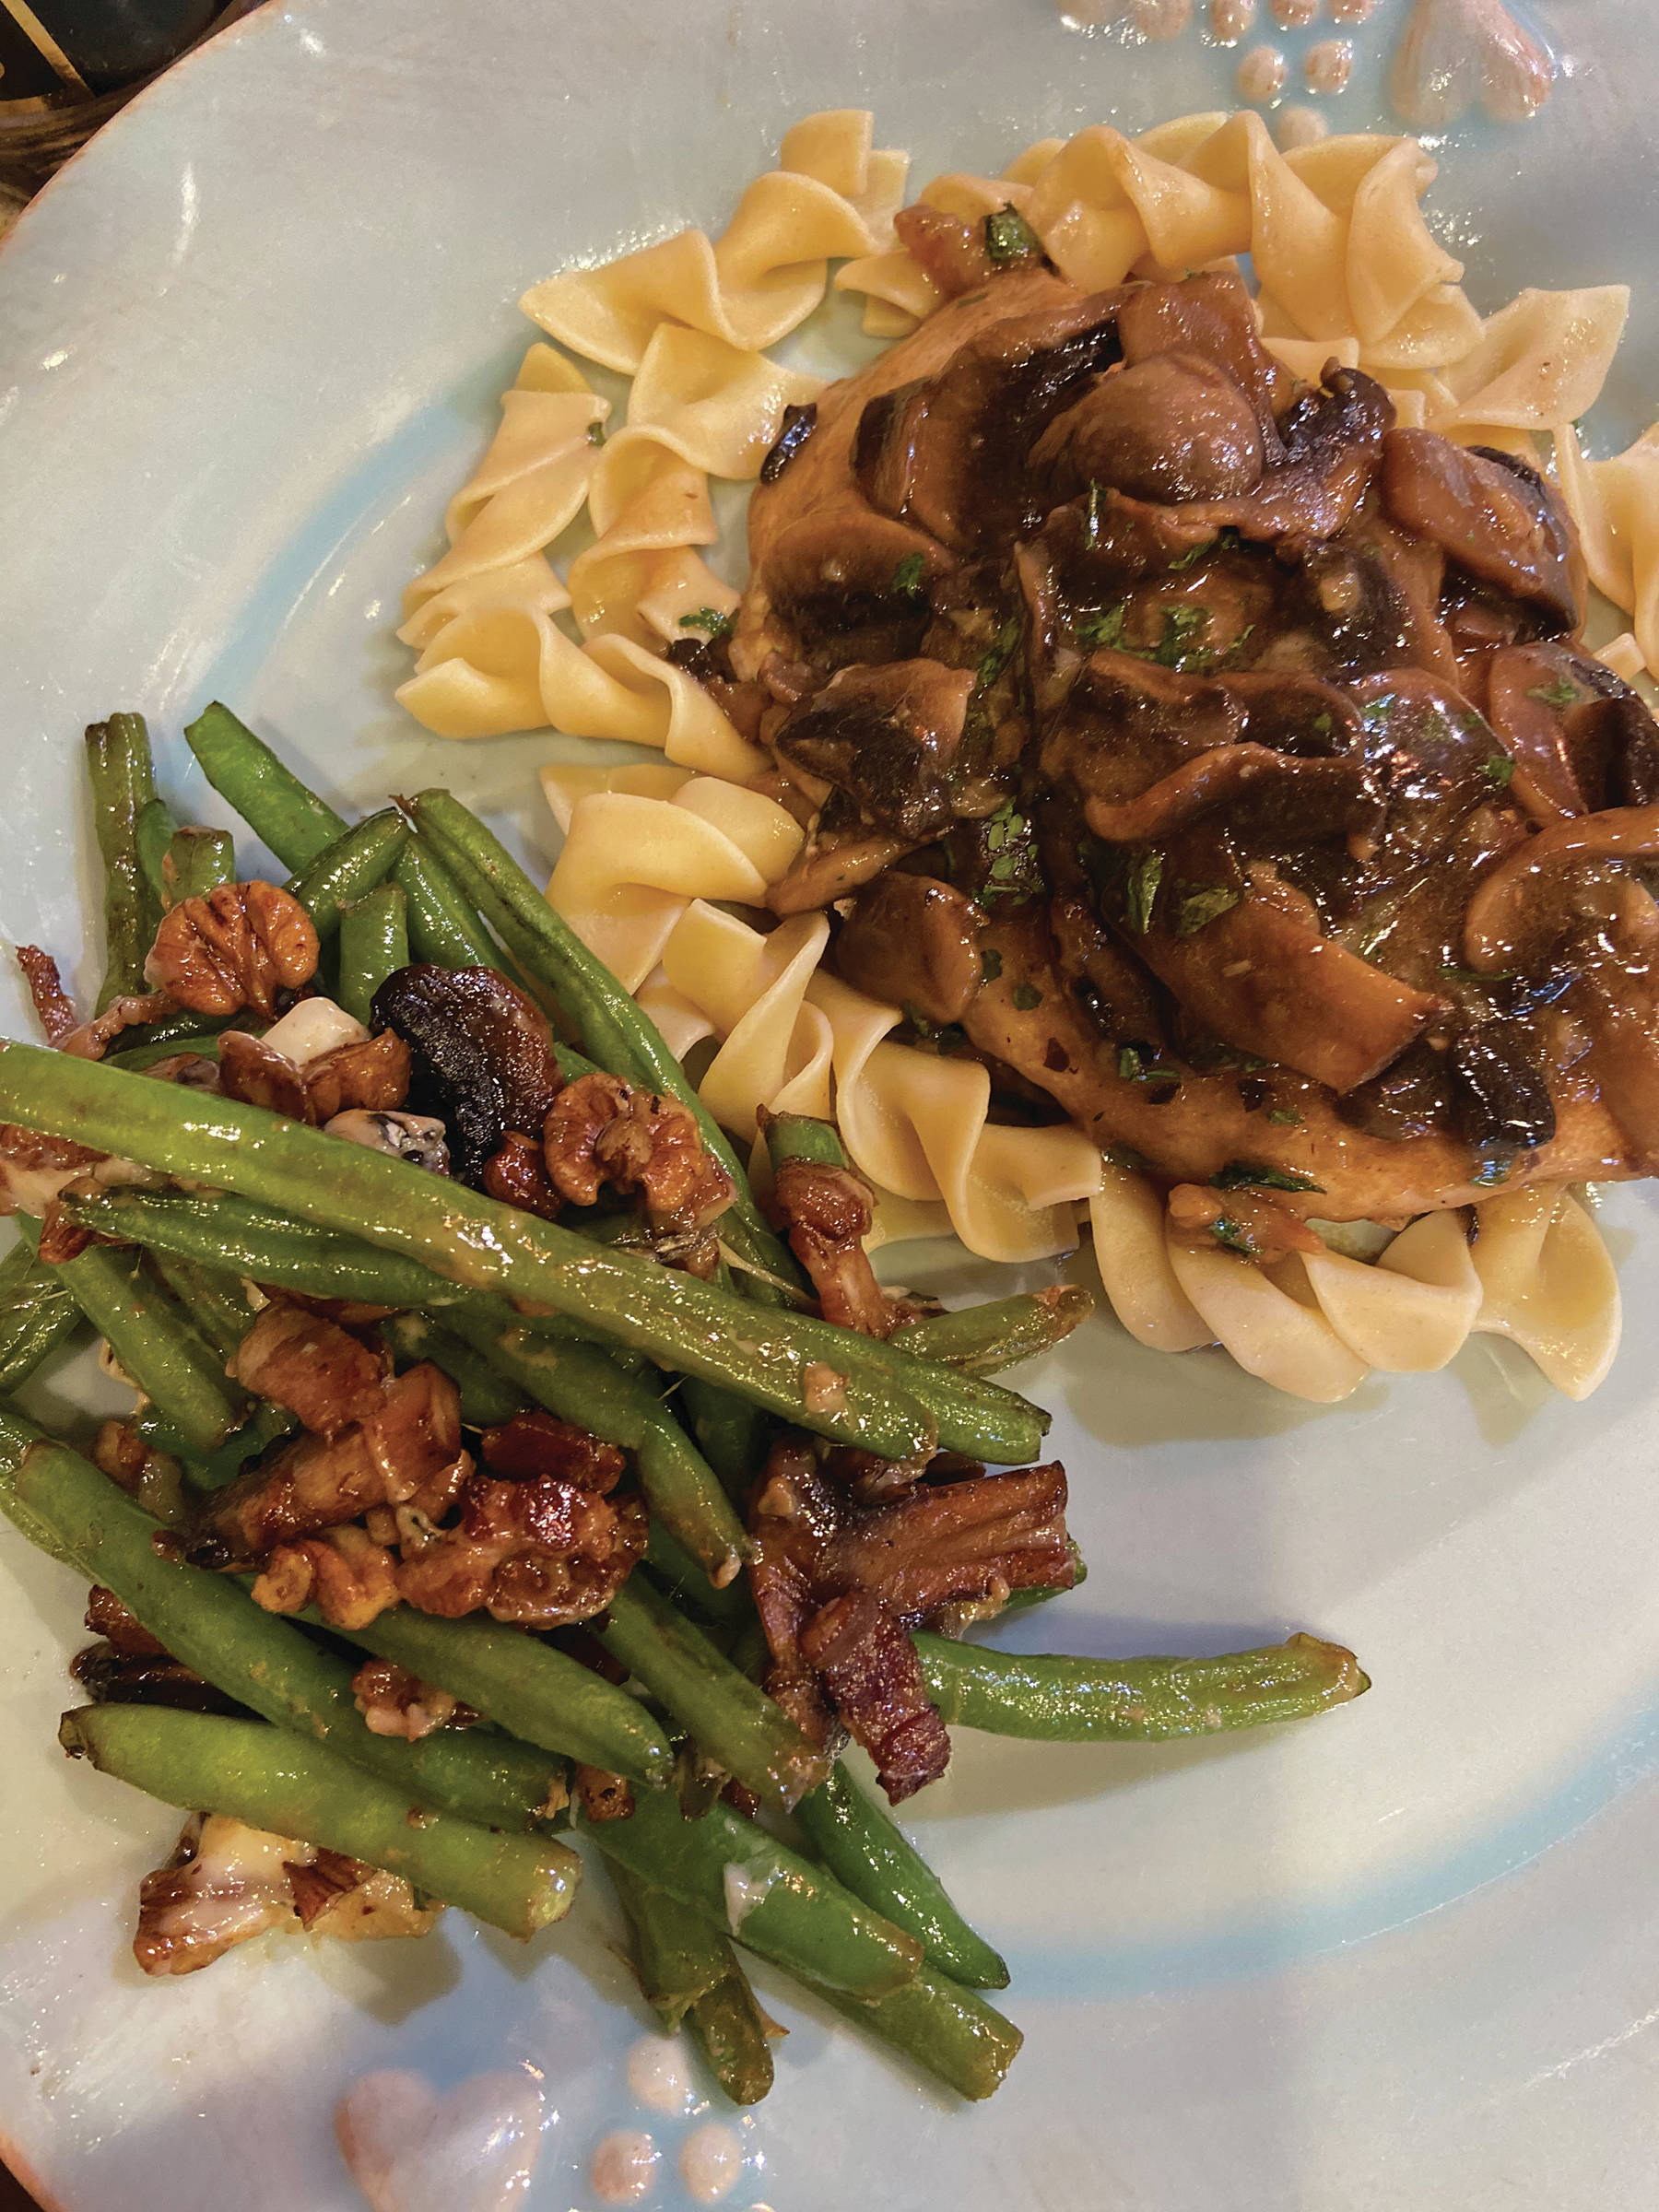 Chicken marsala with green beans and noodles made on April 4, 2020, in Teri Robl’s kitchen in Homer, Alaska. (Photo by Teri Robl)